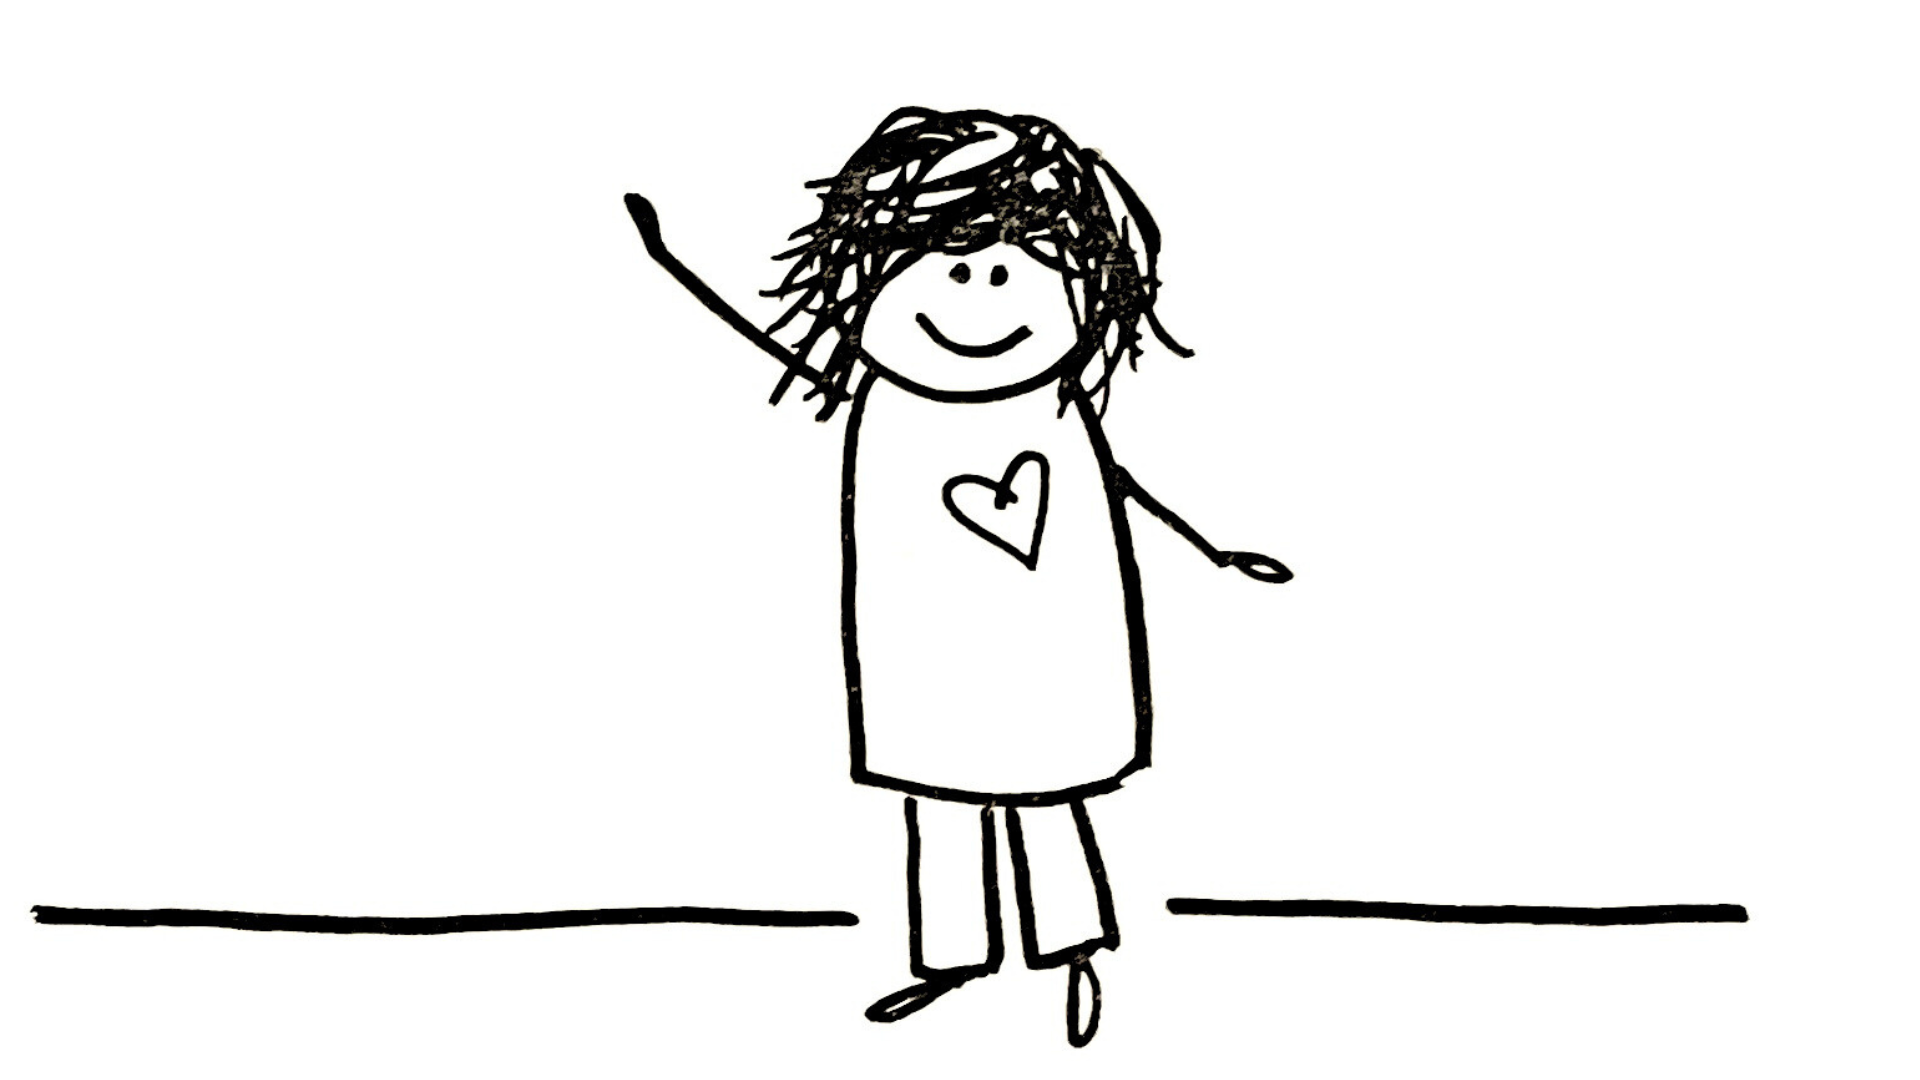 drawing of a smiling person with their arms out